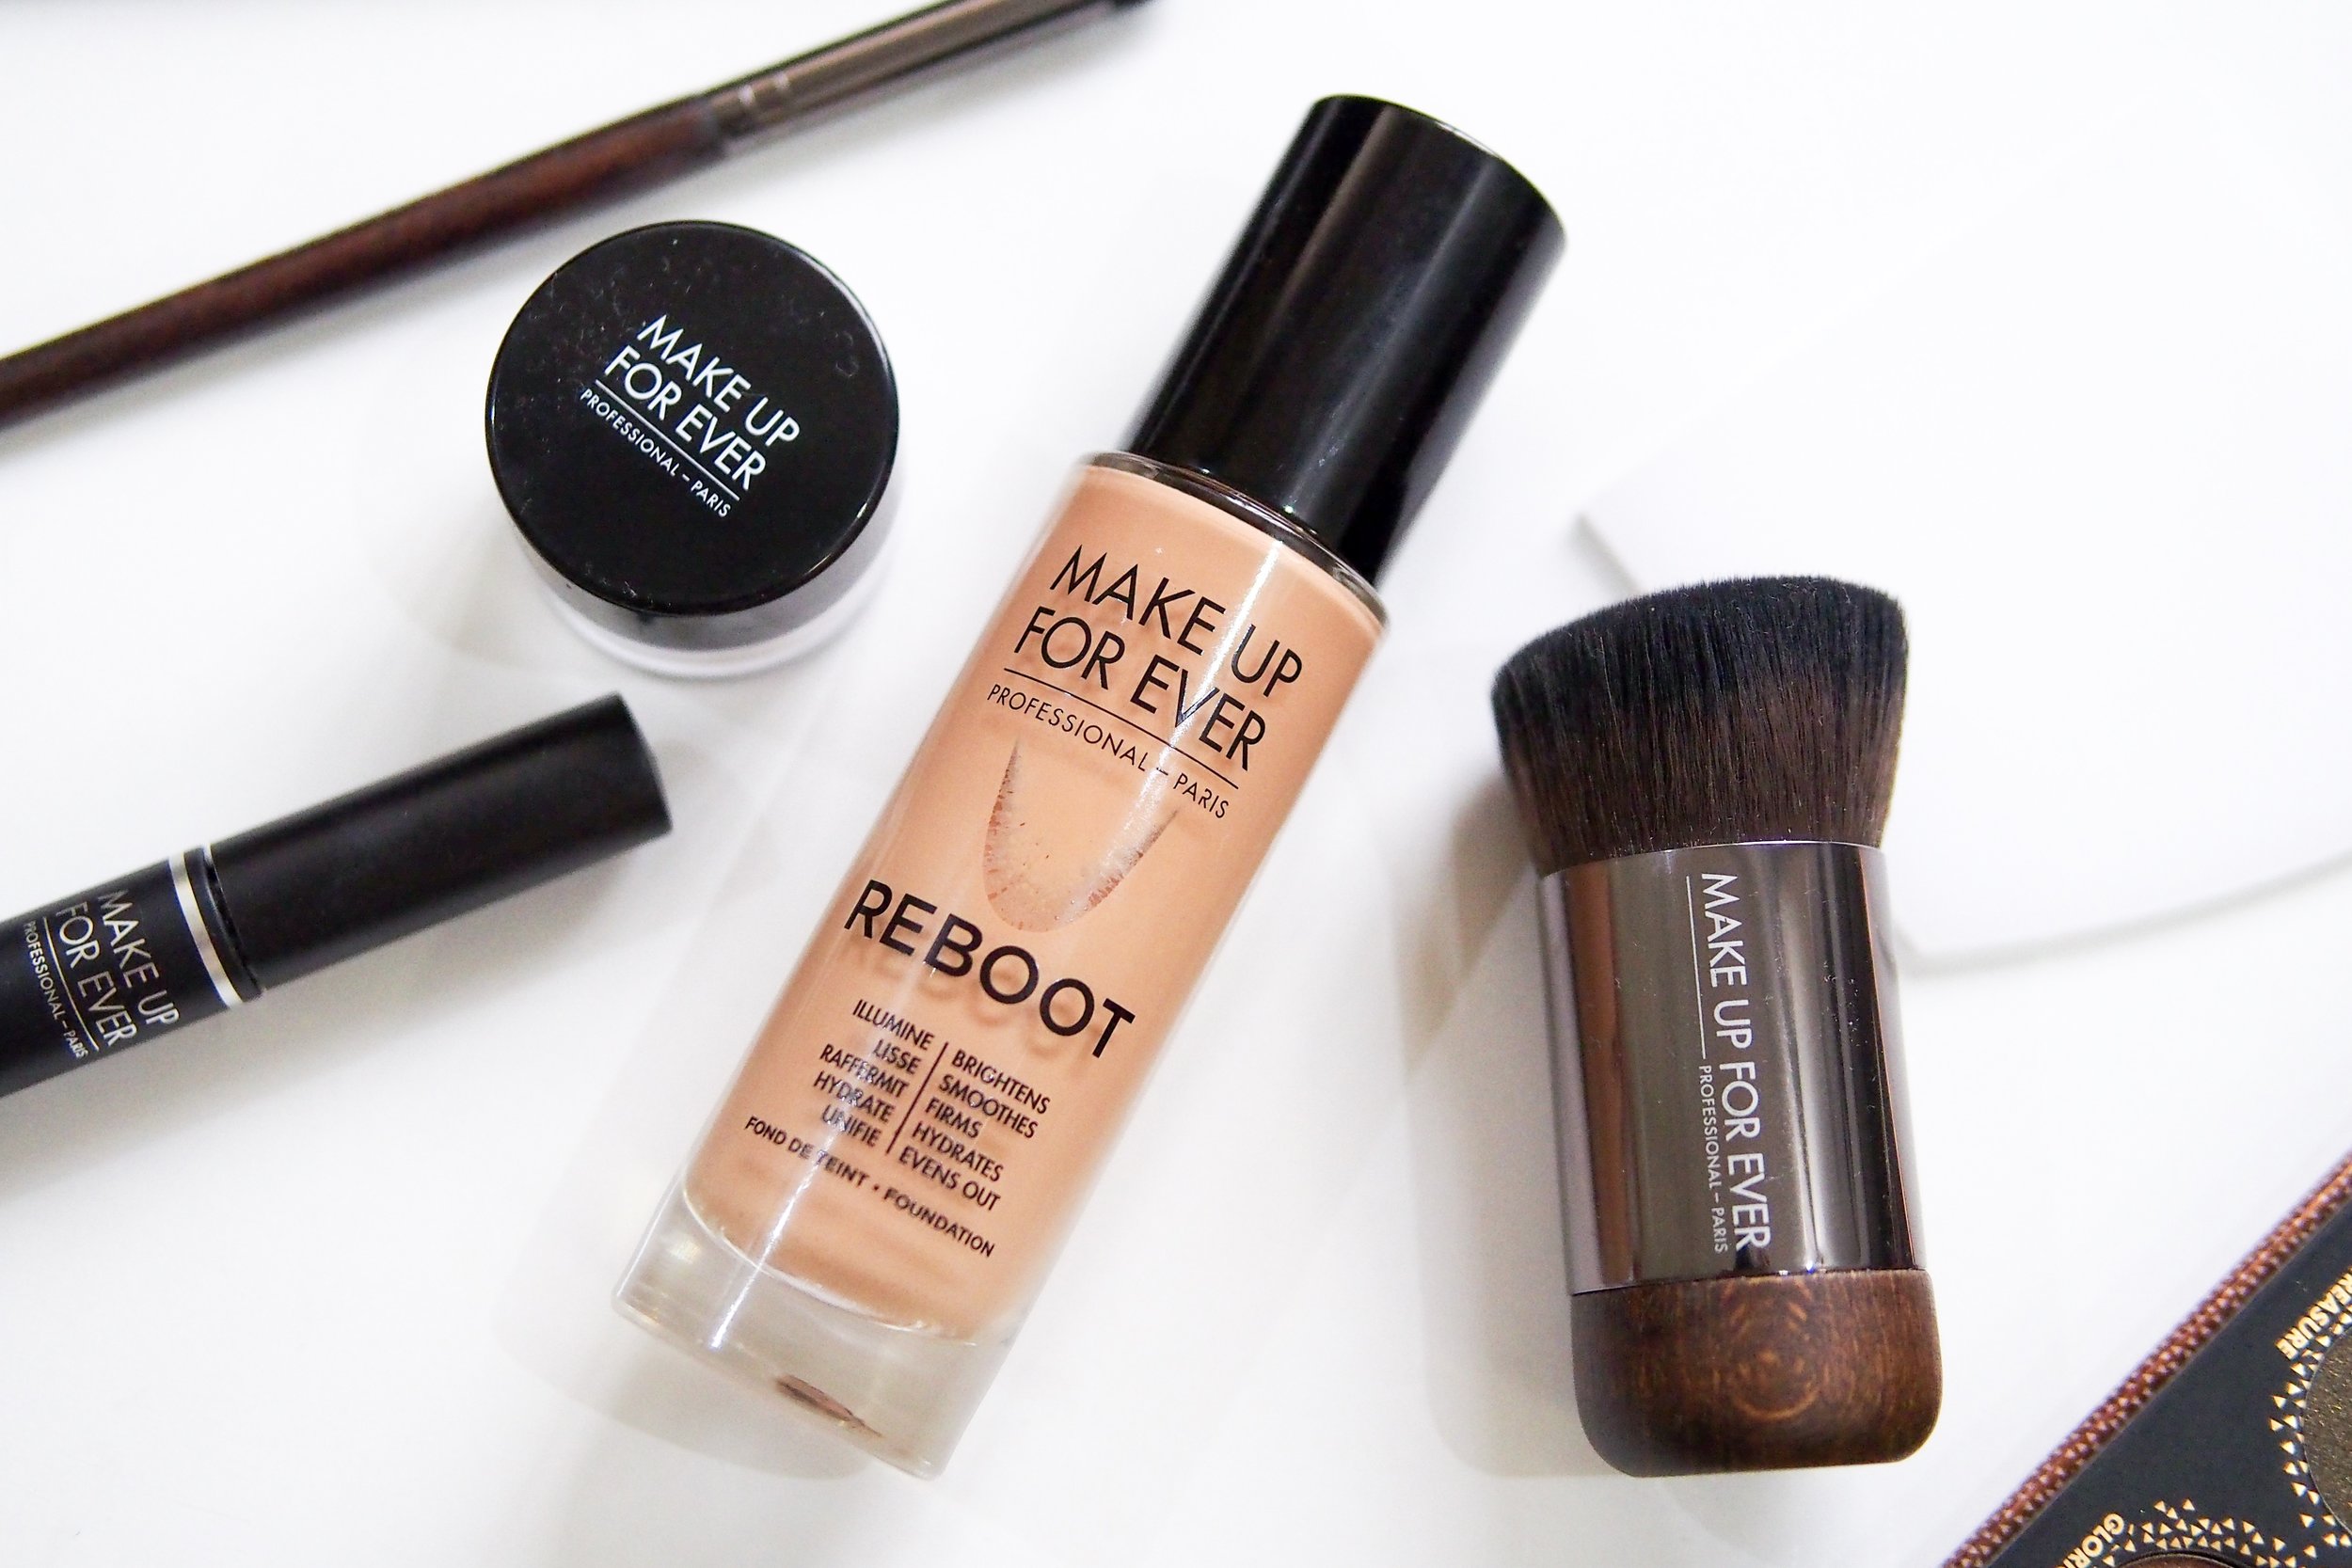 Make Up For Ever Just Launched Its New HD Skin Foundation